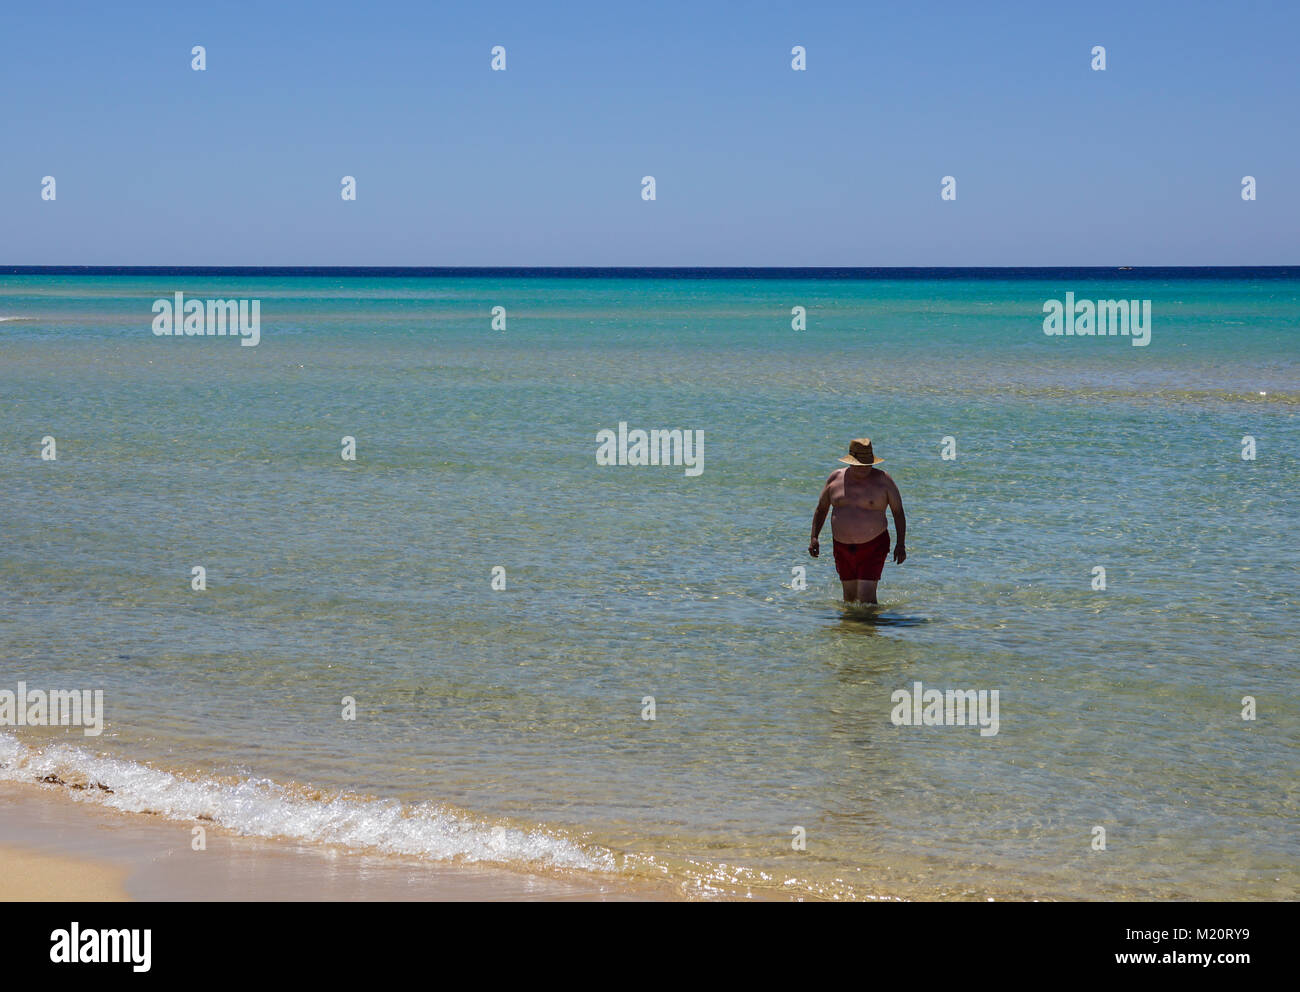 Fuerteventura , Spain 13 june 2017 : an overweight man takes a bath in the sea. Poor nutrition and a sedentary lifestyle. Increased risk of heart disease. Stock Photo